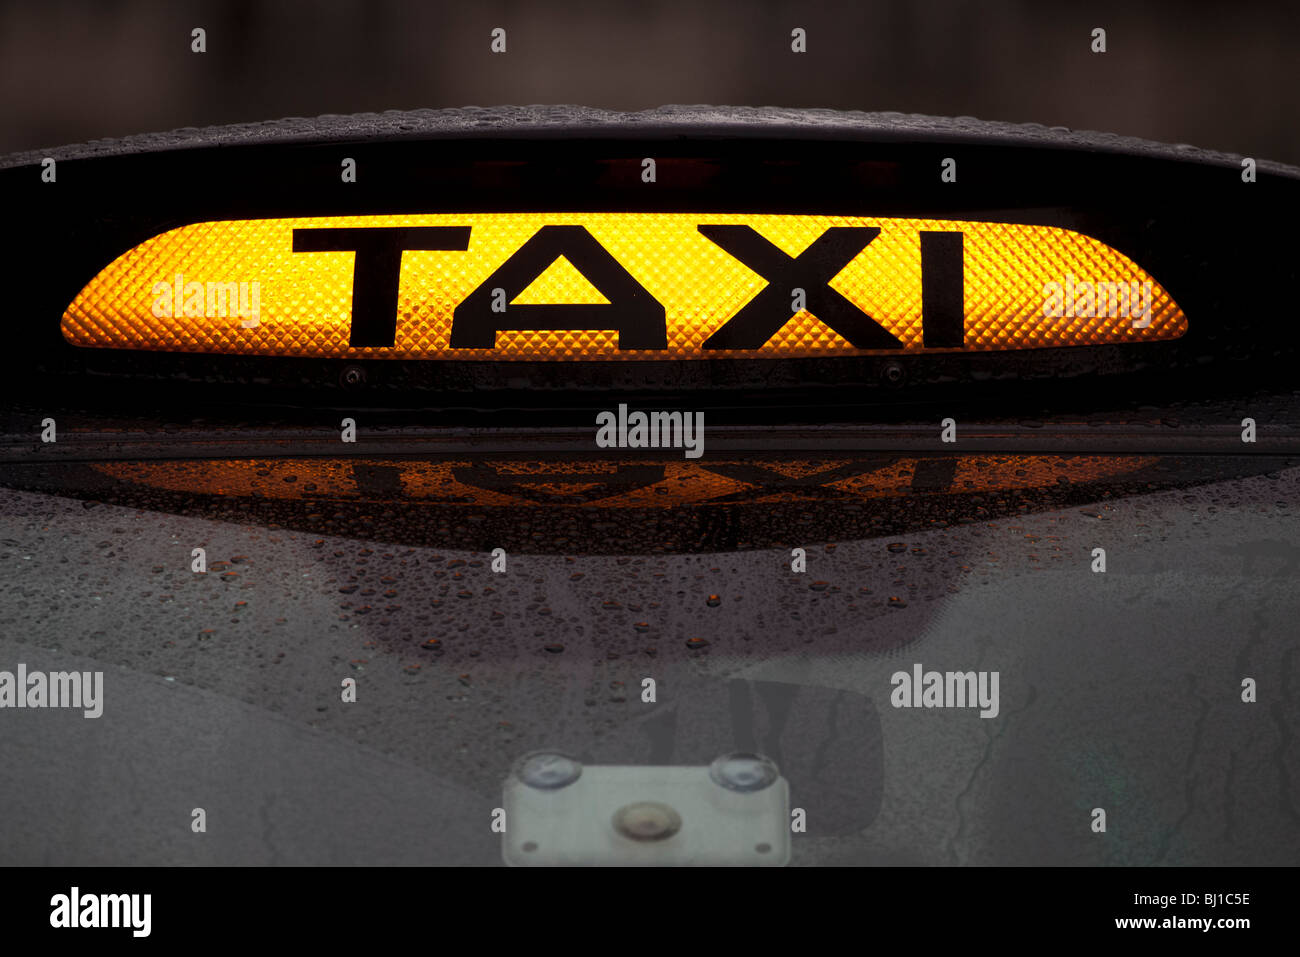 London Taxi Black Cab for Hire Zeichen Stockfoto